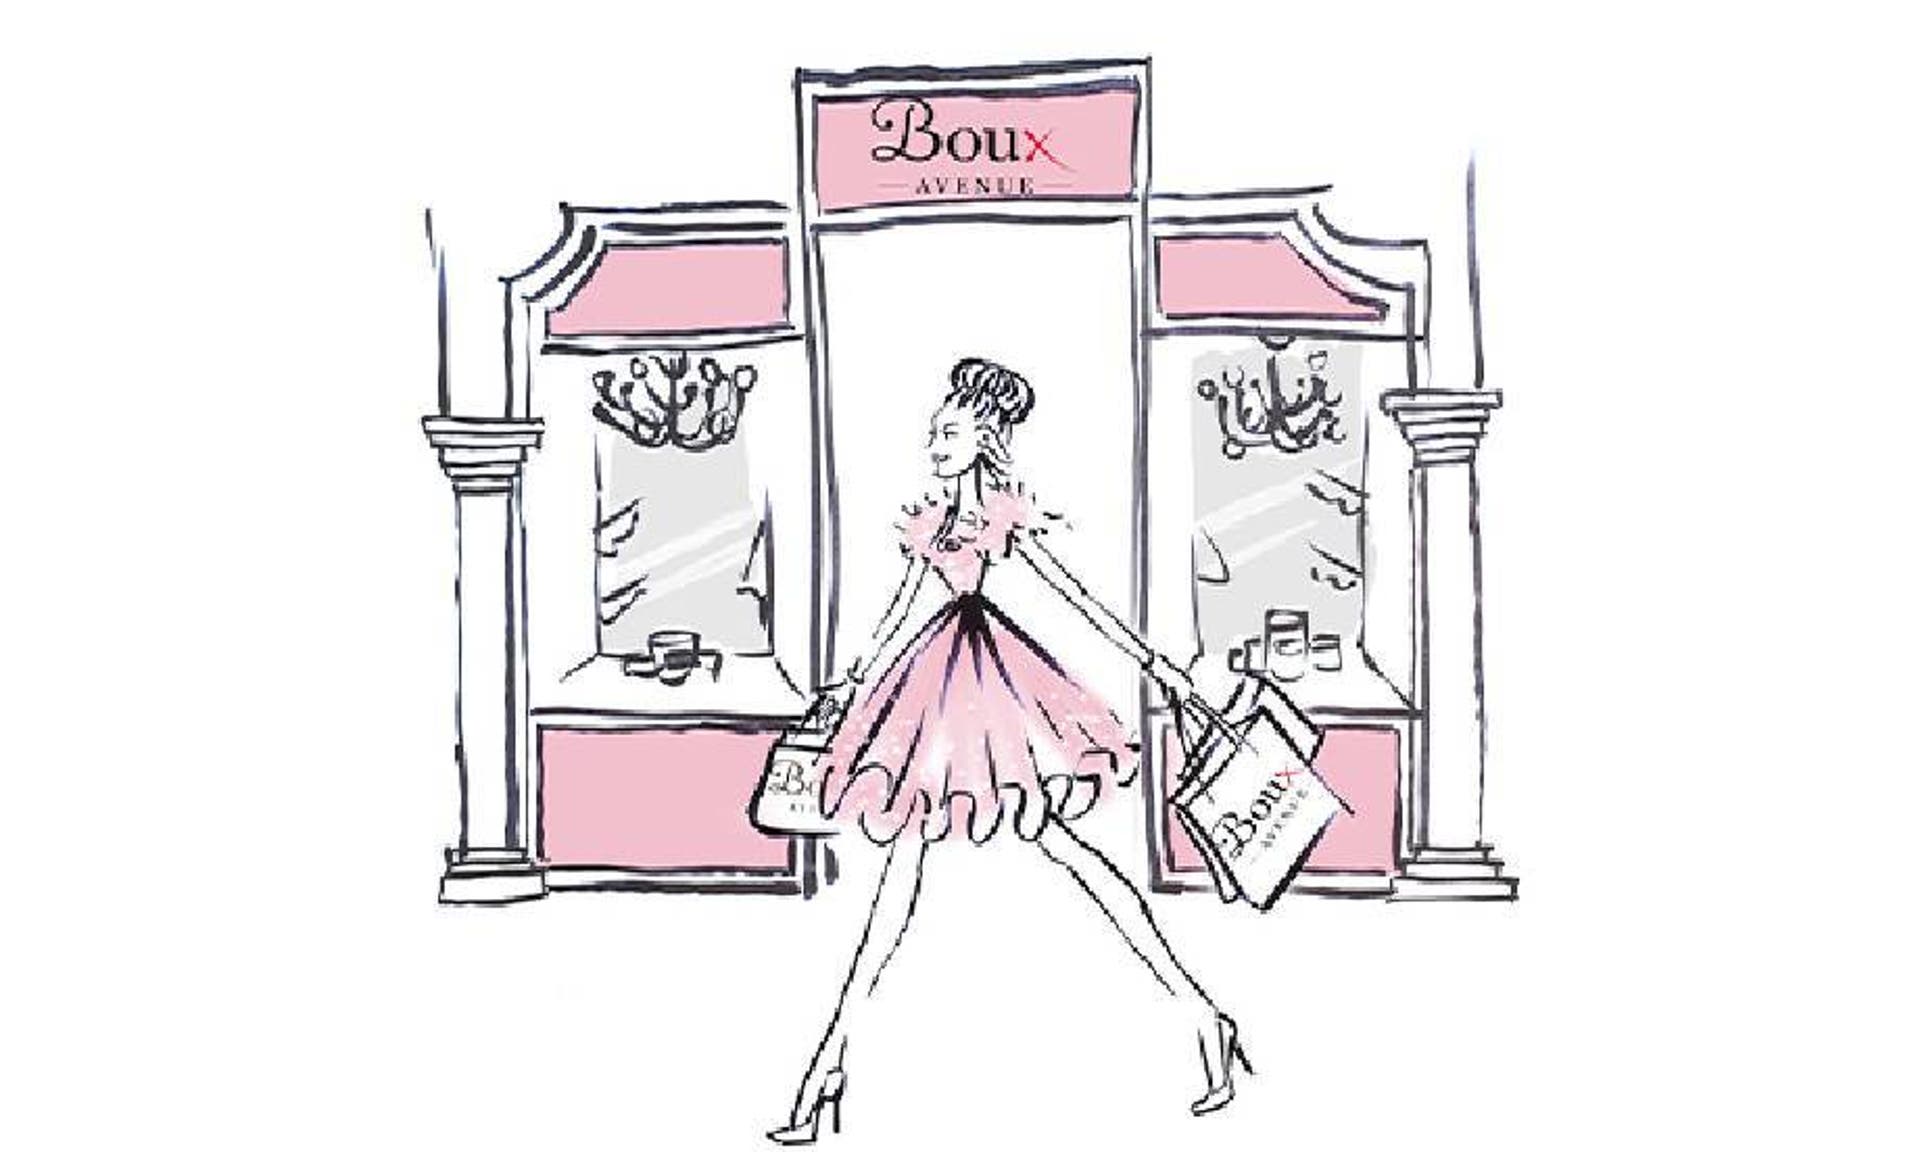  An illustration of a woman wearing a pink dress walking outside a Boux Avenue store, carrying a Boux Avenue bag. 